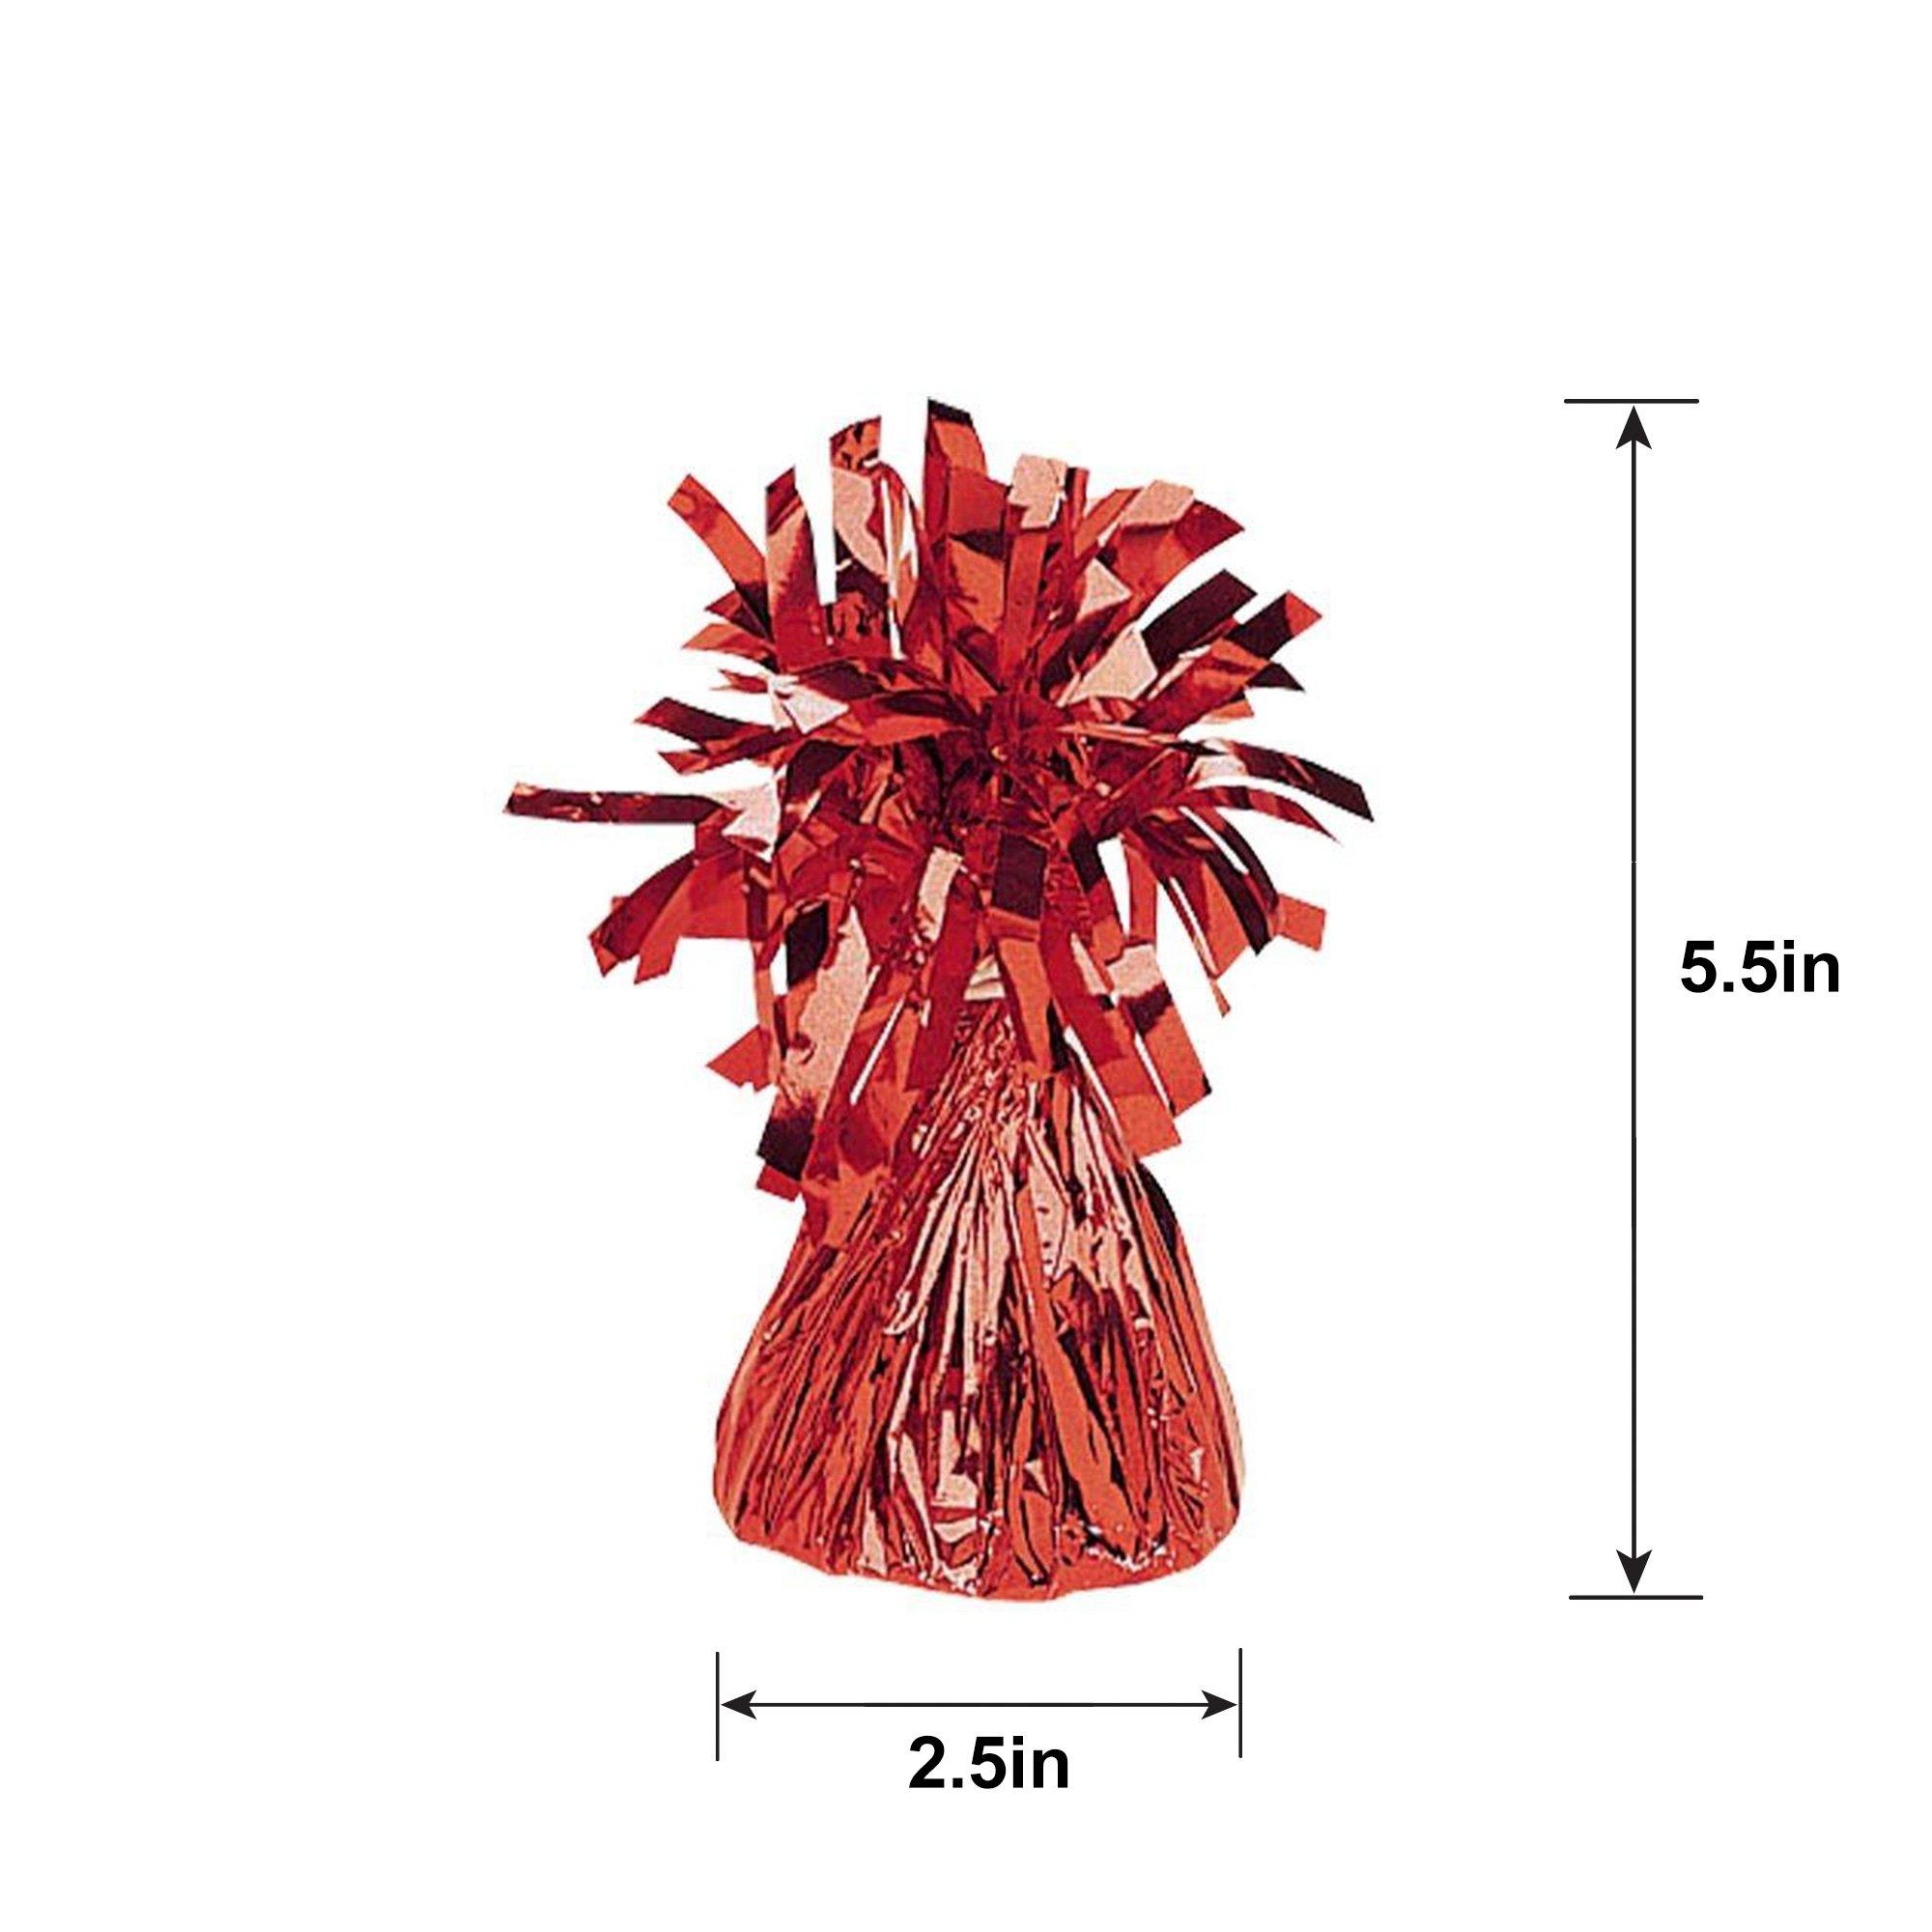 Red Foil Balloon Weight, 6oz